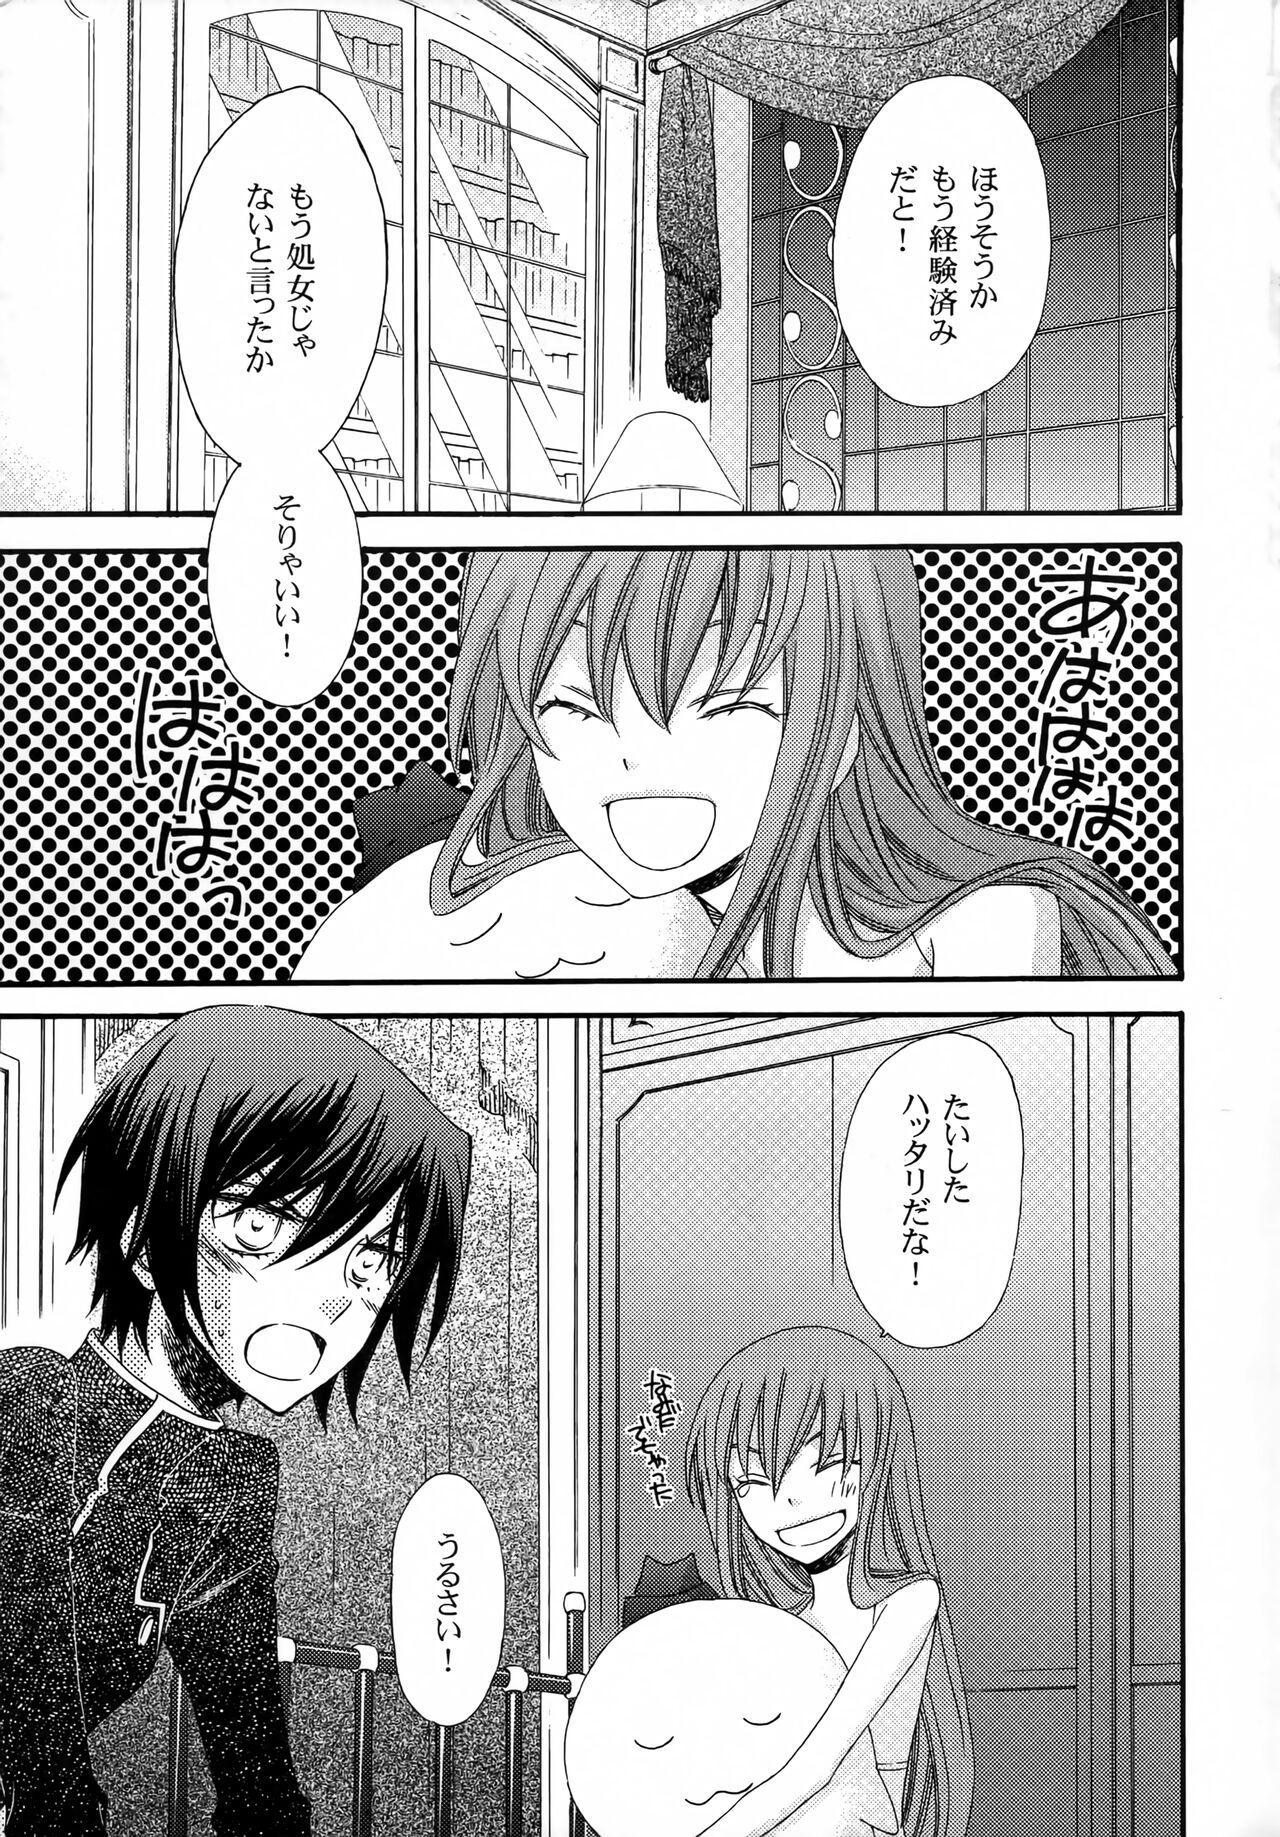 Maid Miriam - Code geass Gaystraight - Page 4